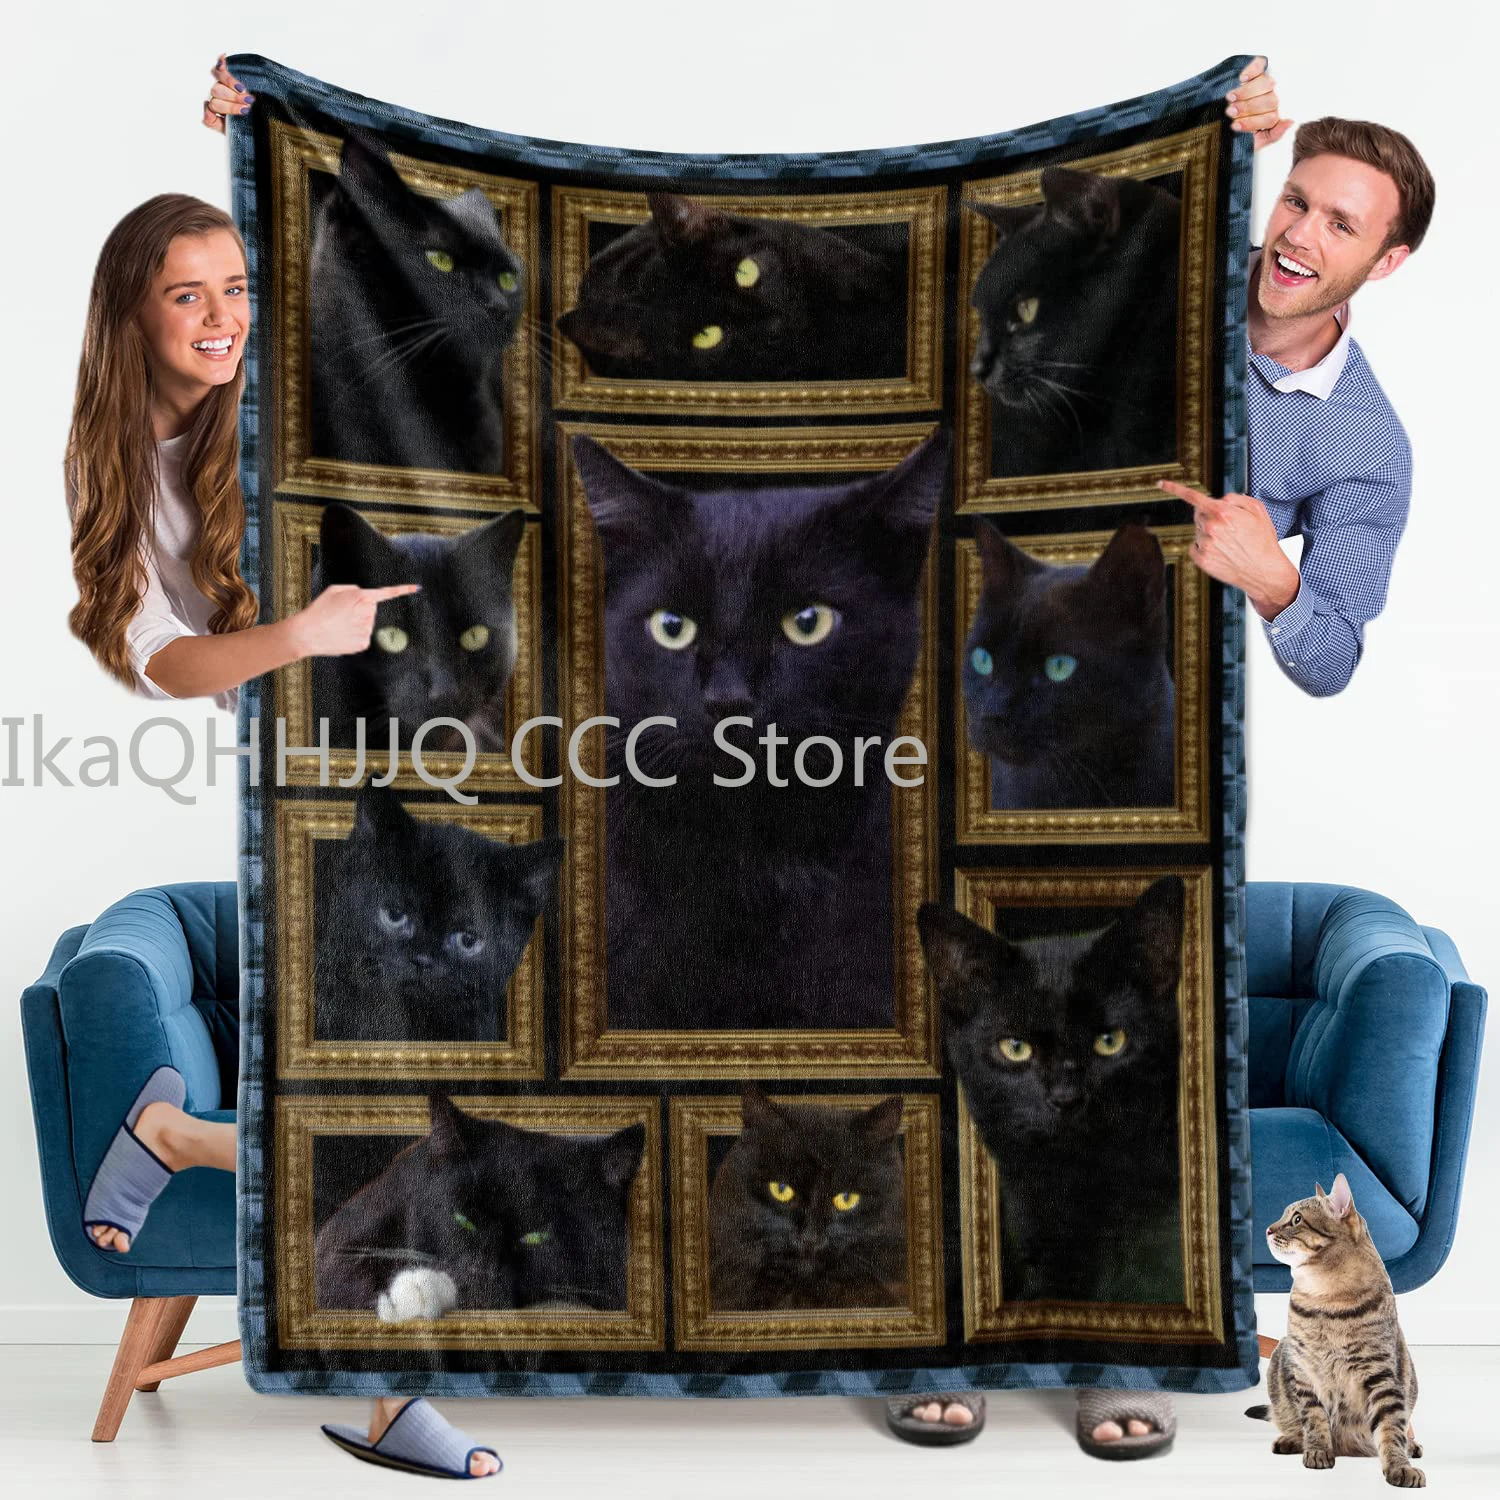 

Black Cat Throw Blanket Super Soft Cozy Warm Plush Sheet Bedspread for Bed Sofa Travel Picnic Plaid Blankets Thermal Lightweight